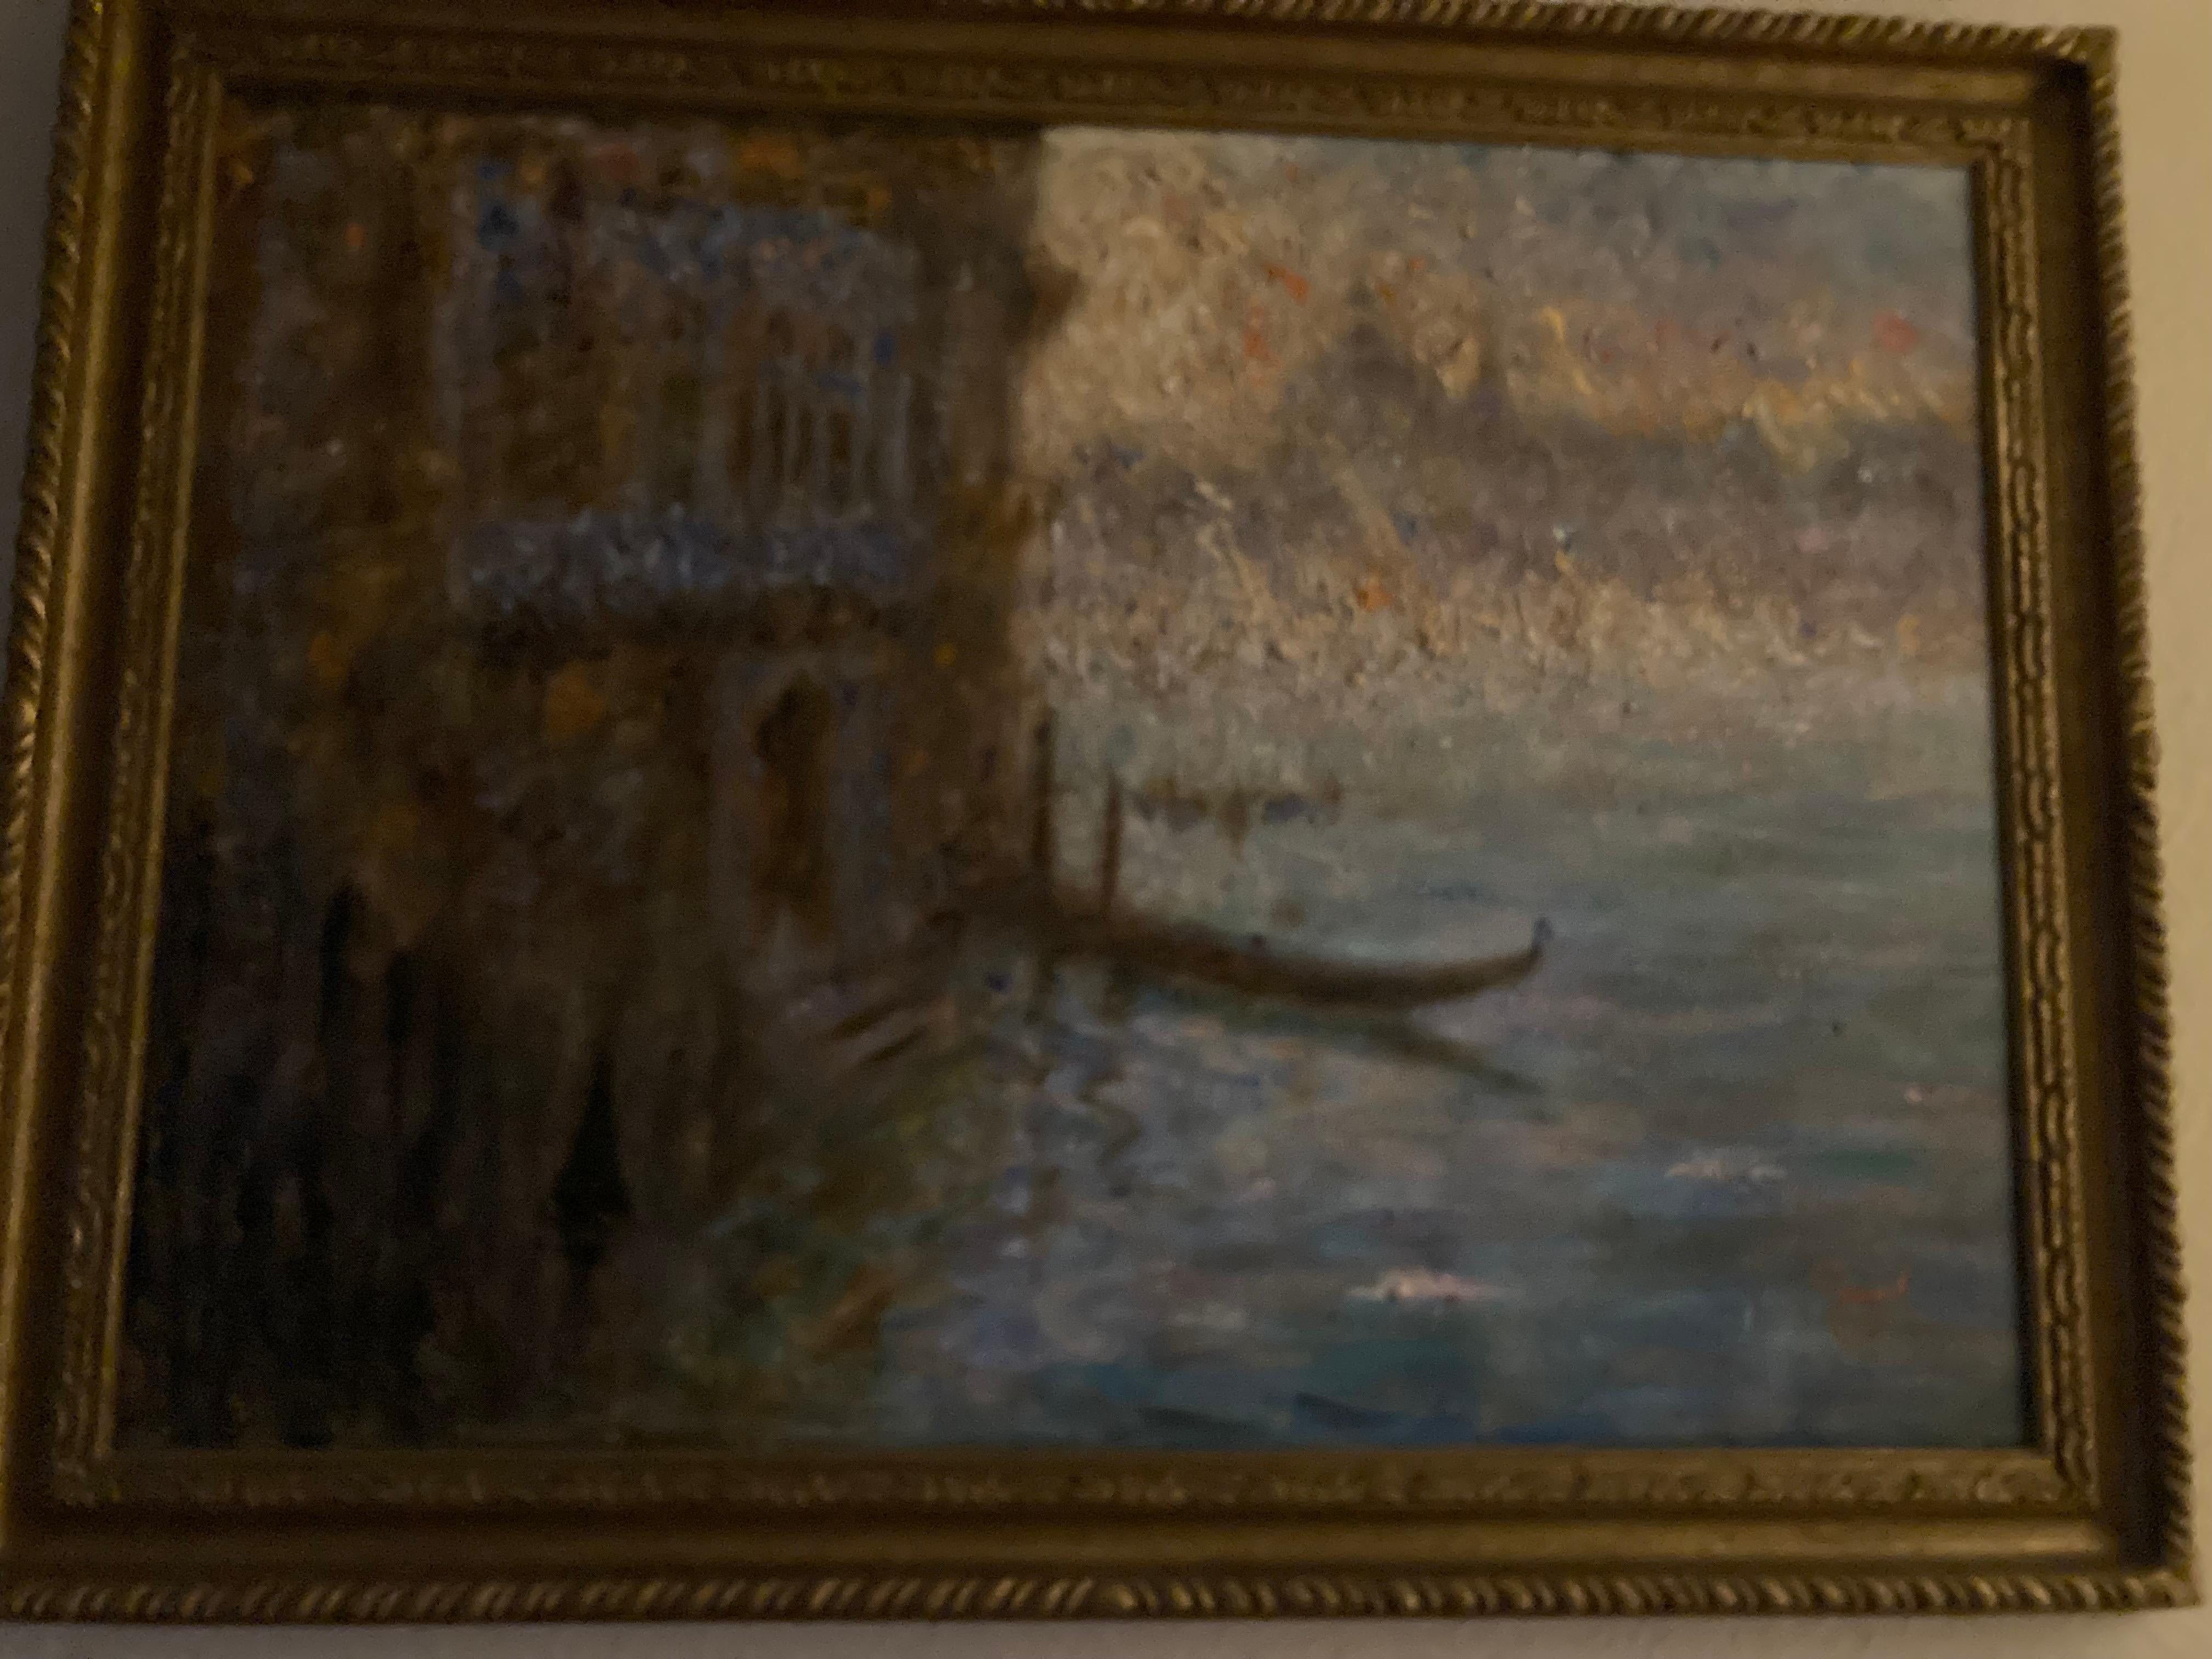  Palaces on Grand canal, Venice Italy at Night  Large Impressionist Oil Framed